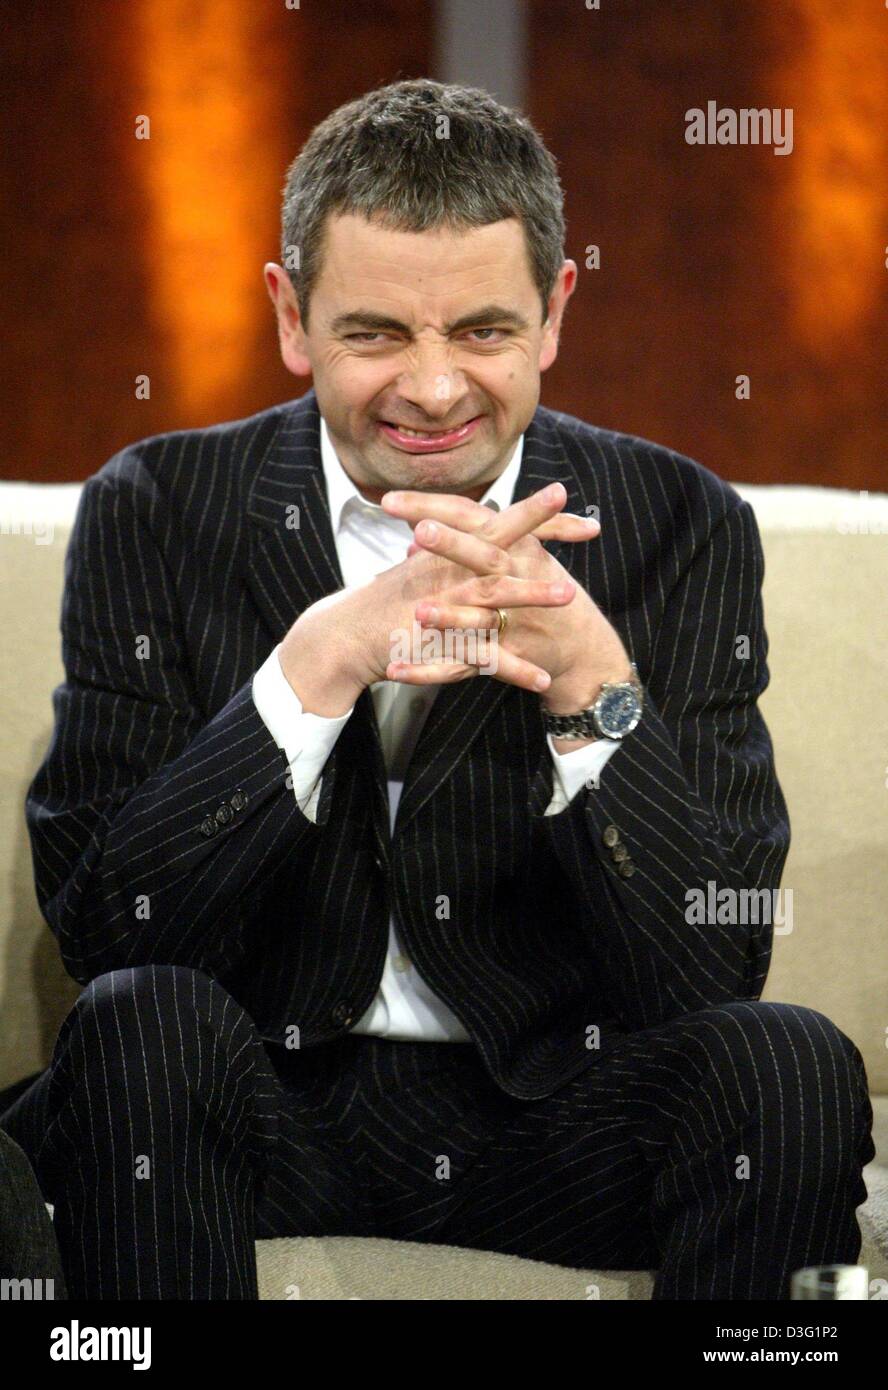 (dpa) - British comedian Rowan Atkinson alias 'Mr Bean' pulls a face during the popular TV show 'Wetten dass...?' (bet that...?), in Lucerne, Switzerland, 22 March 2003. The live show broadcast by the German TV station ZDF was watched by 13.8 million people (which is a market share of 44 per cent), although it was subject to be cancelled at the last minute due to the war in Iraq. Stock Photo